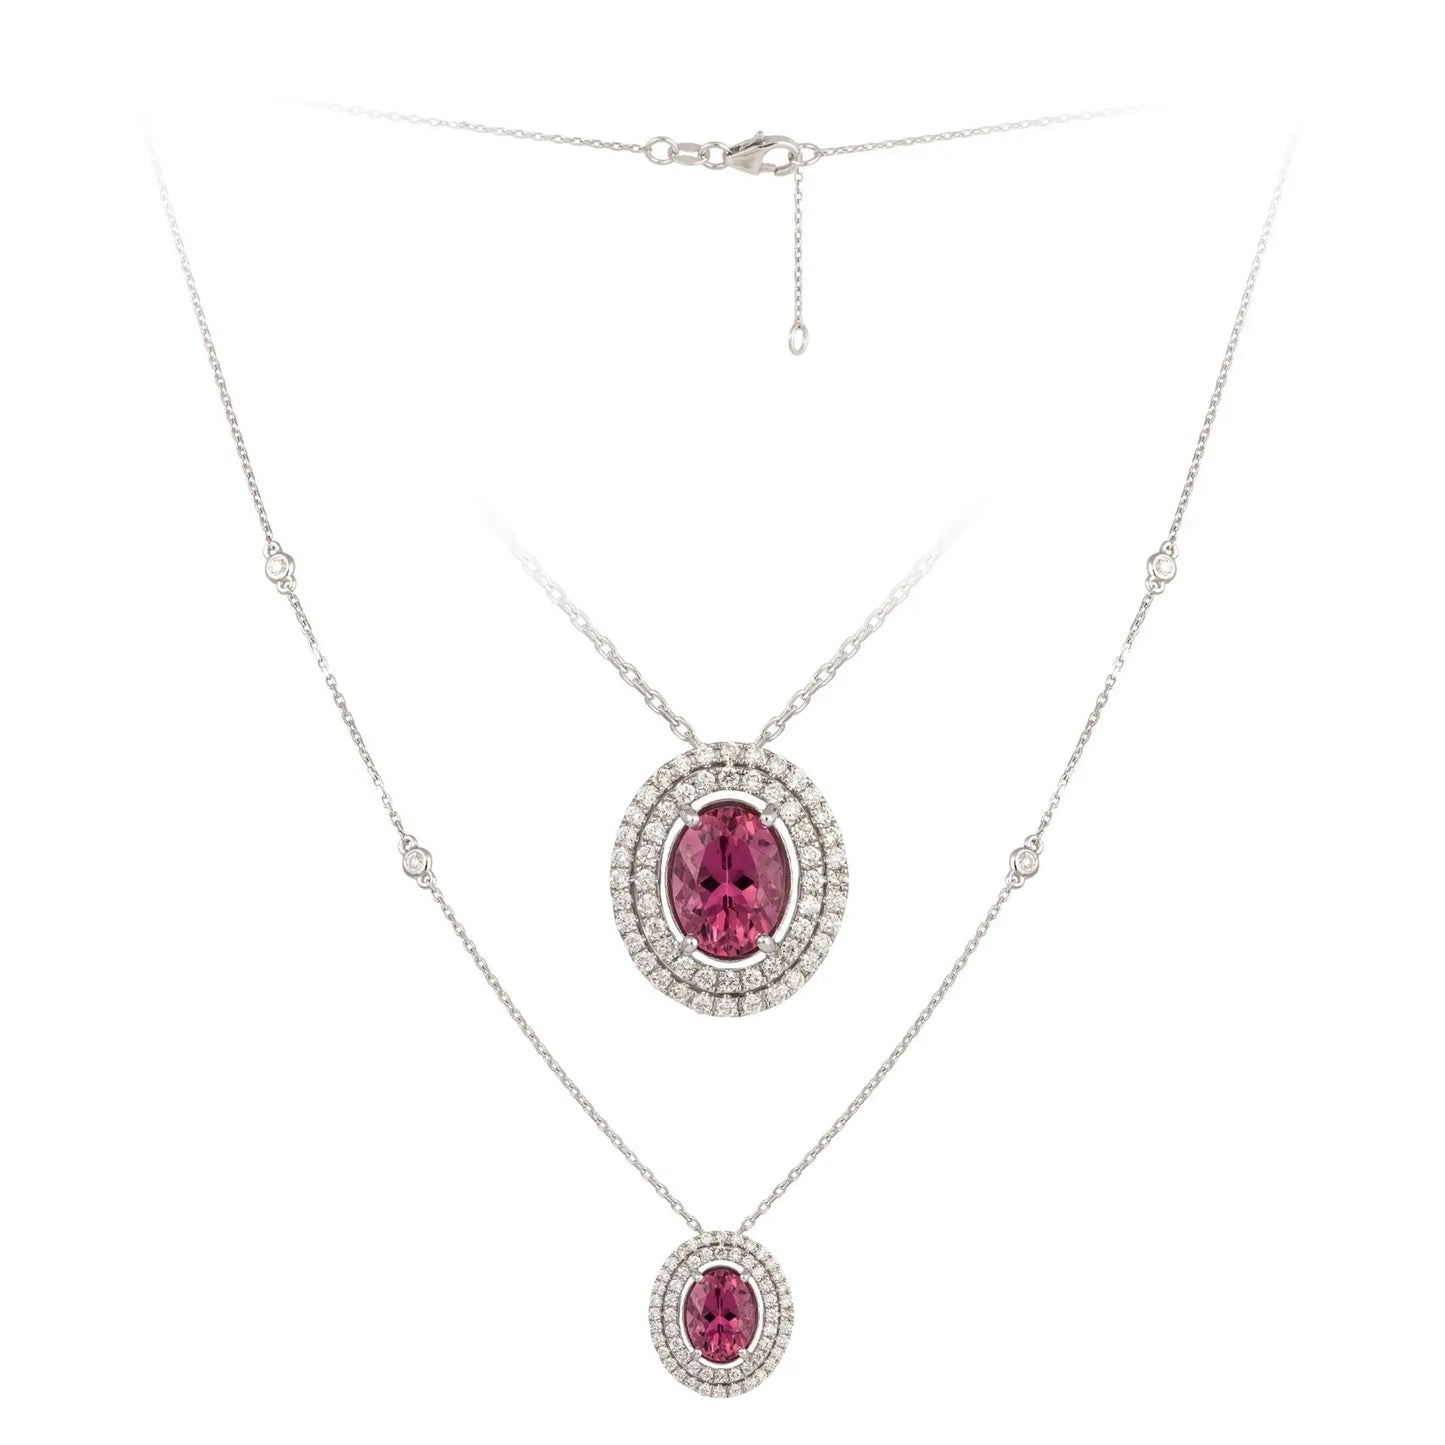 White Gold Oval Pink Tourmaline and Diamond Necklace - Danson Jewelers White Gold Necklaces 